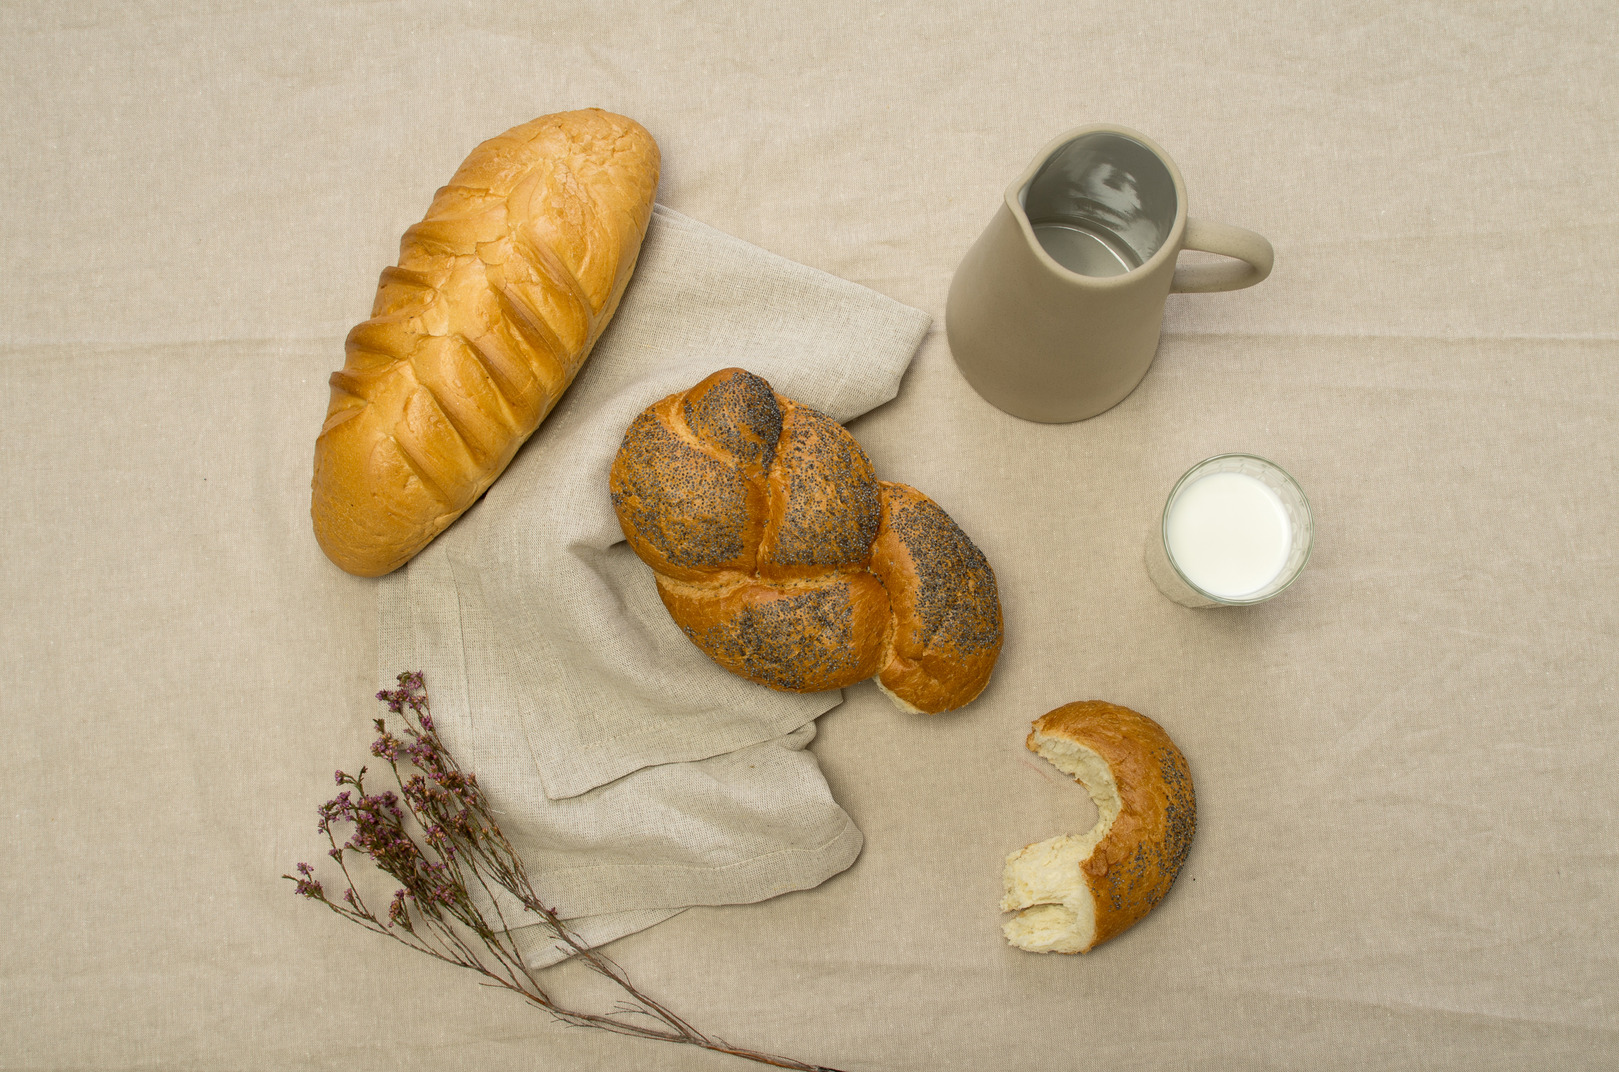 Enjoy freshly baked bread and a glass of milk